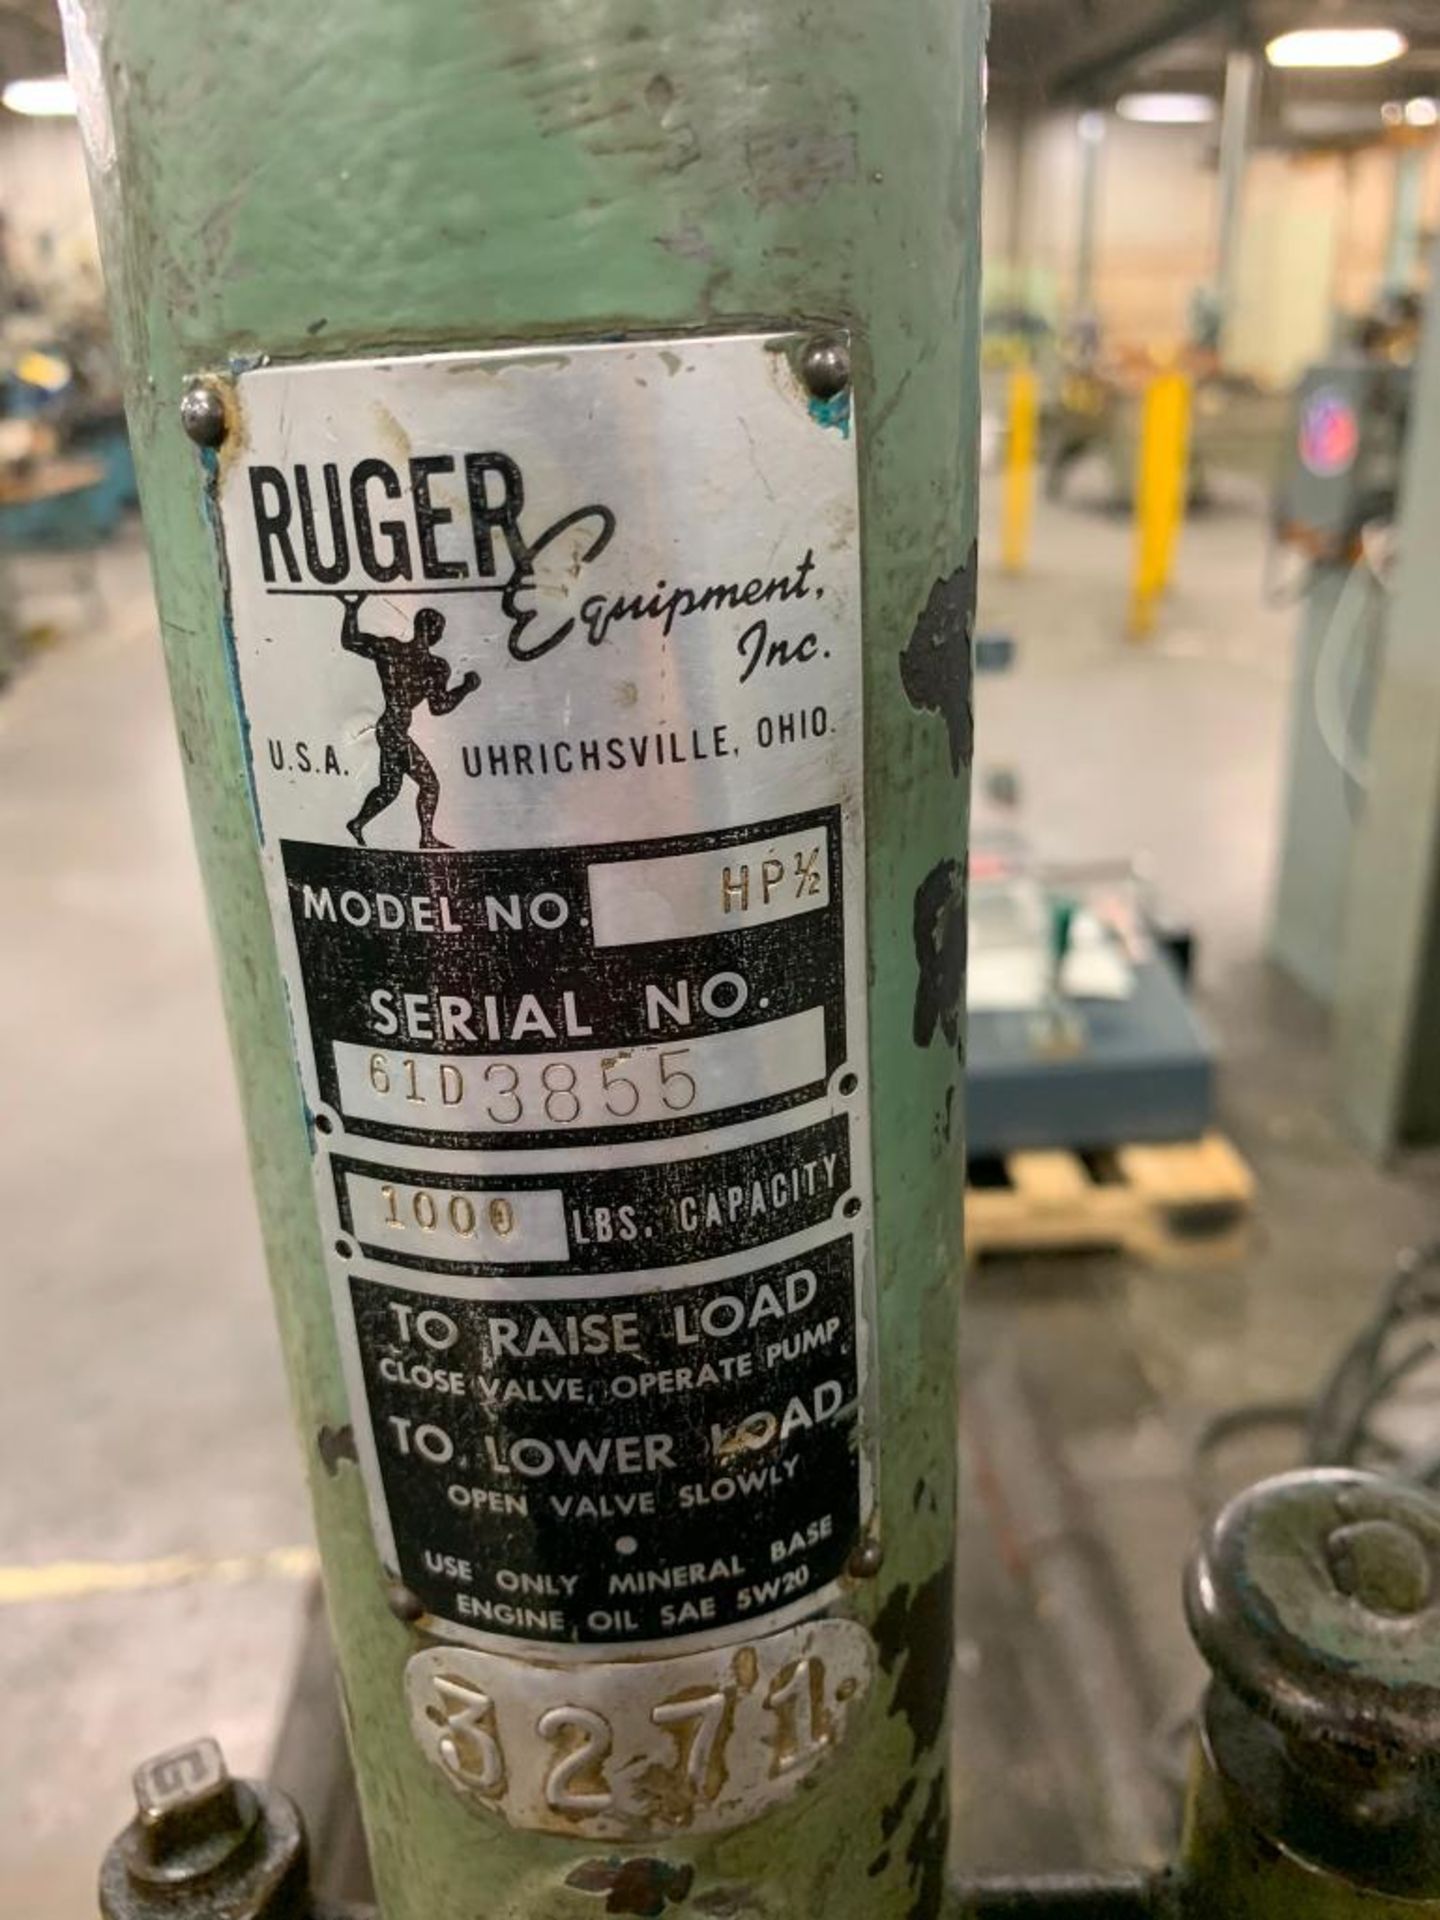 Ruger Equipment Hydraulic Crane, Model HP1/2, 1,000 LB Cabinet, S/N 61D3855 - Image 3 of 3